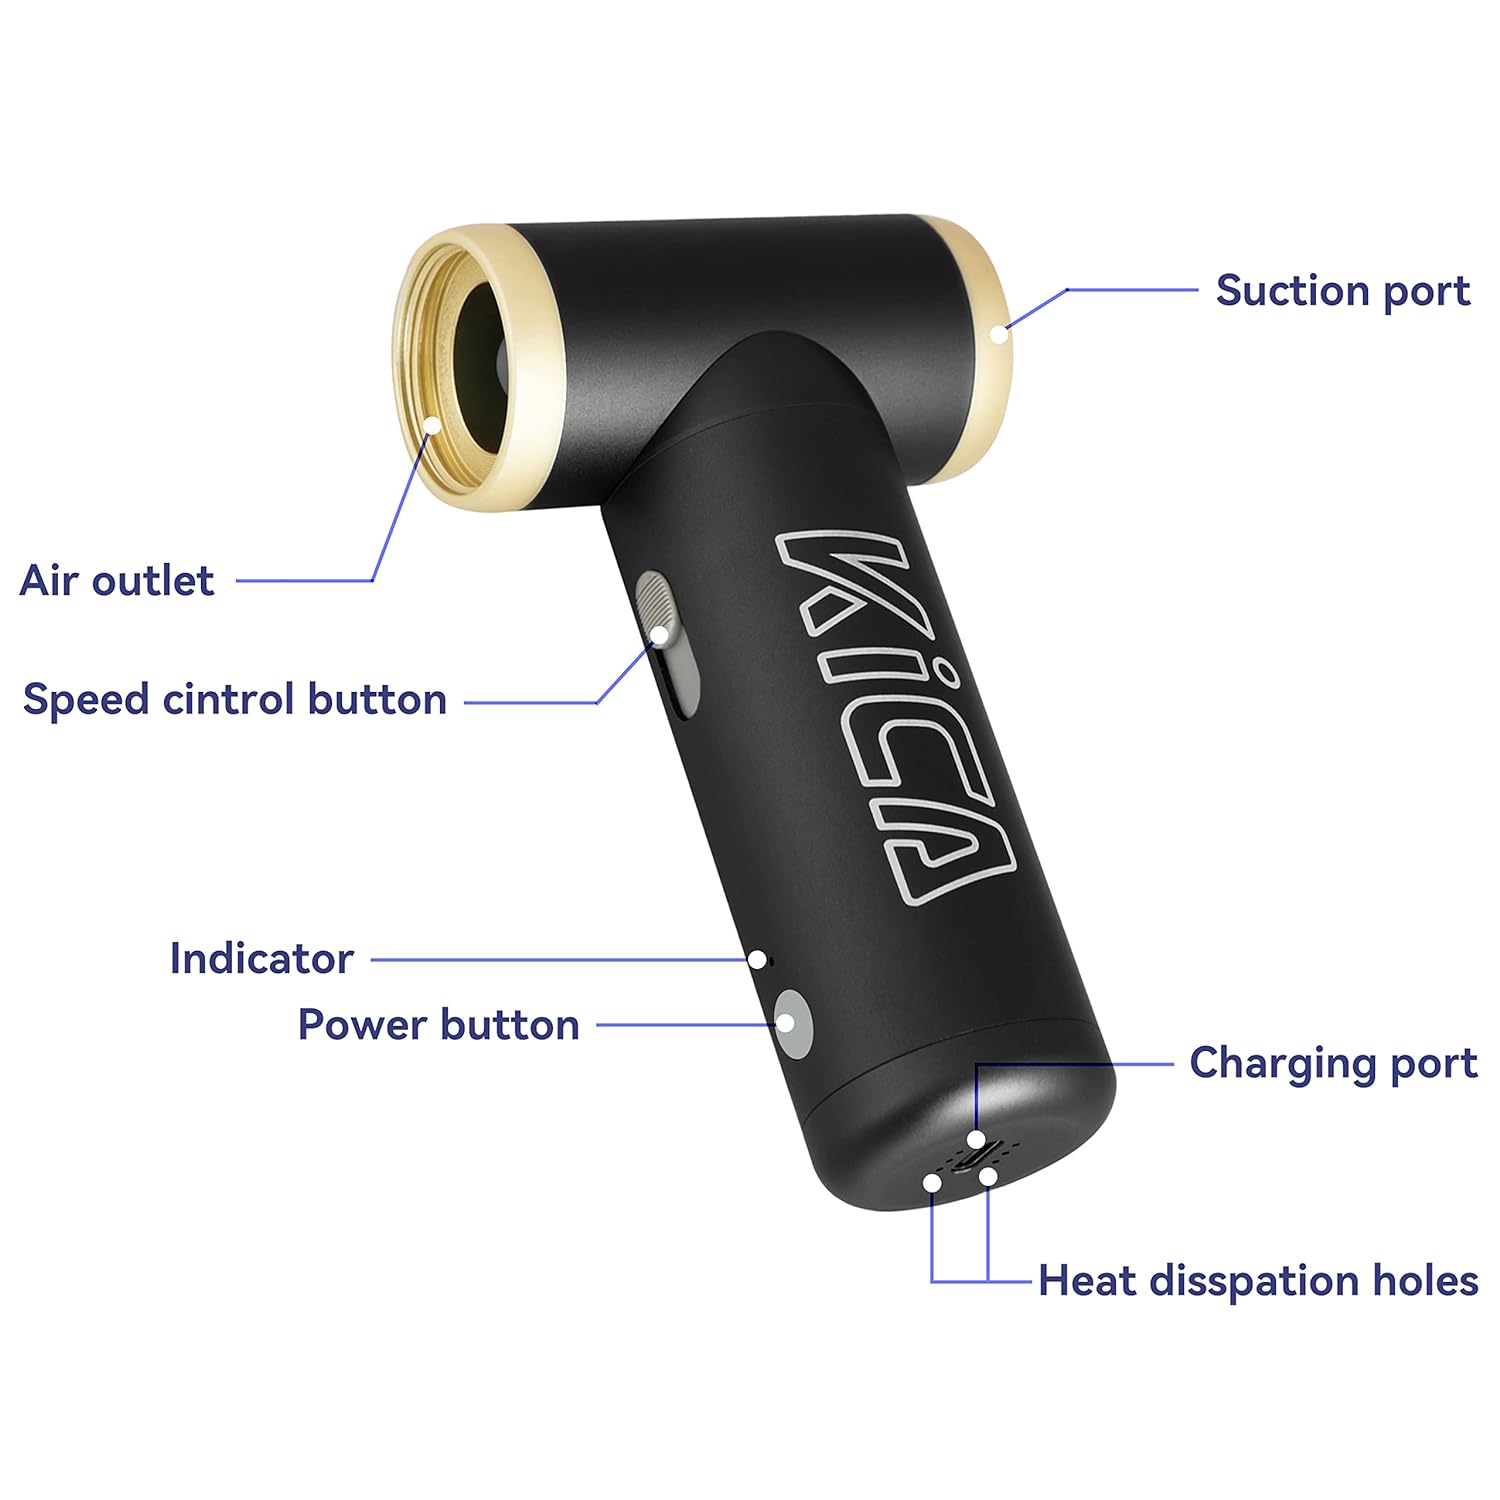 KICA Jet Fan 2 with labeled parts Available at our ecommerce electronics store in India Perfect for tech enthusiasts and gadget lovers looking for innovative solutions